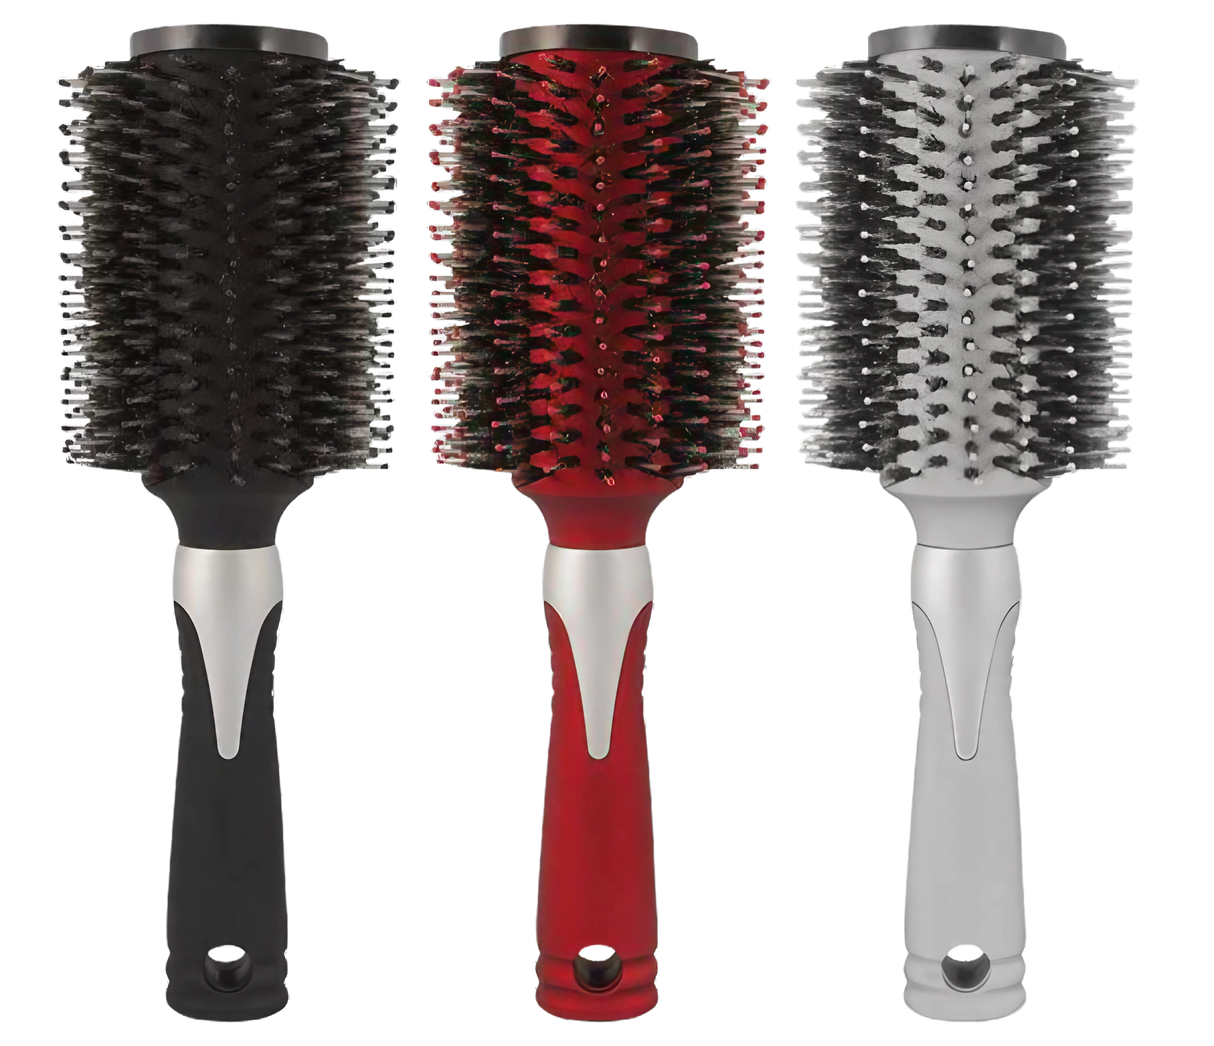 Round Hair Brush Security Containers in black, red, and grey, front view, hidden storage